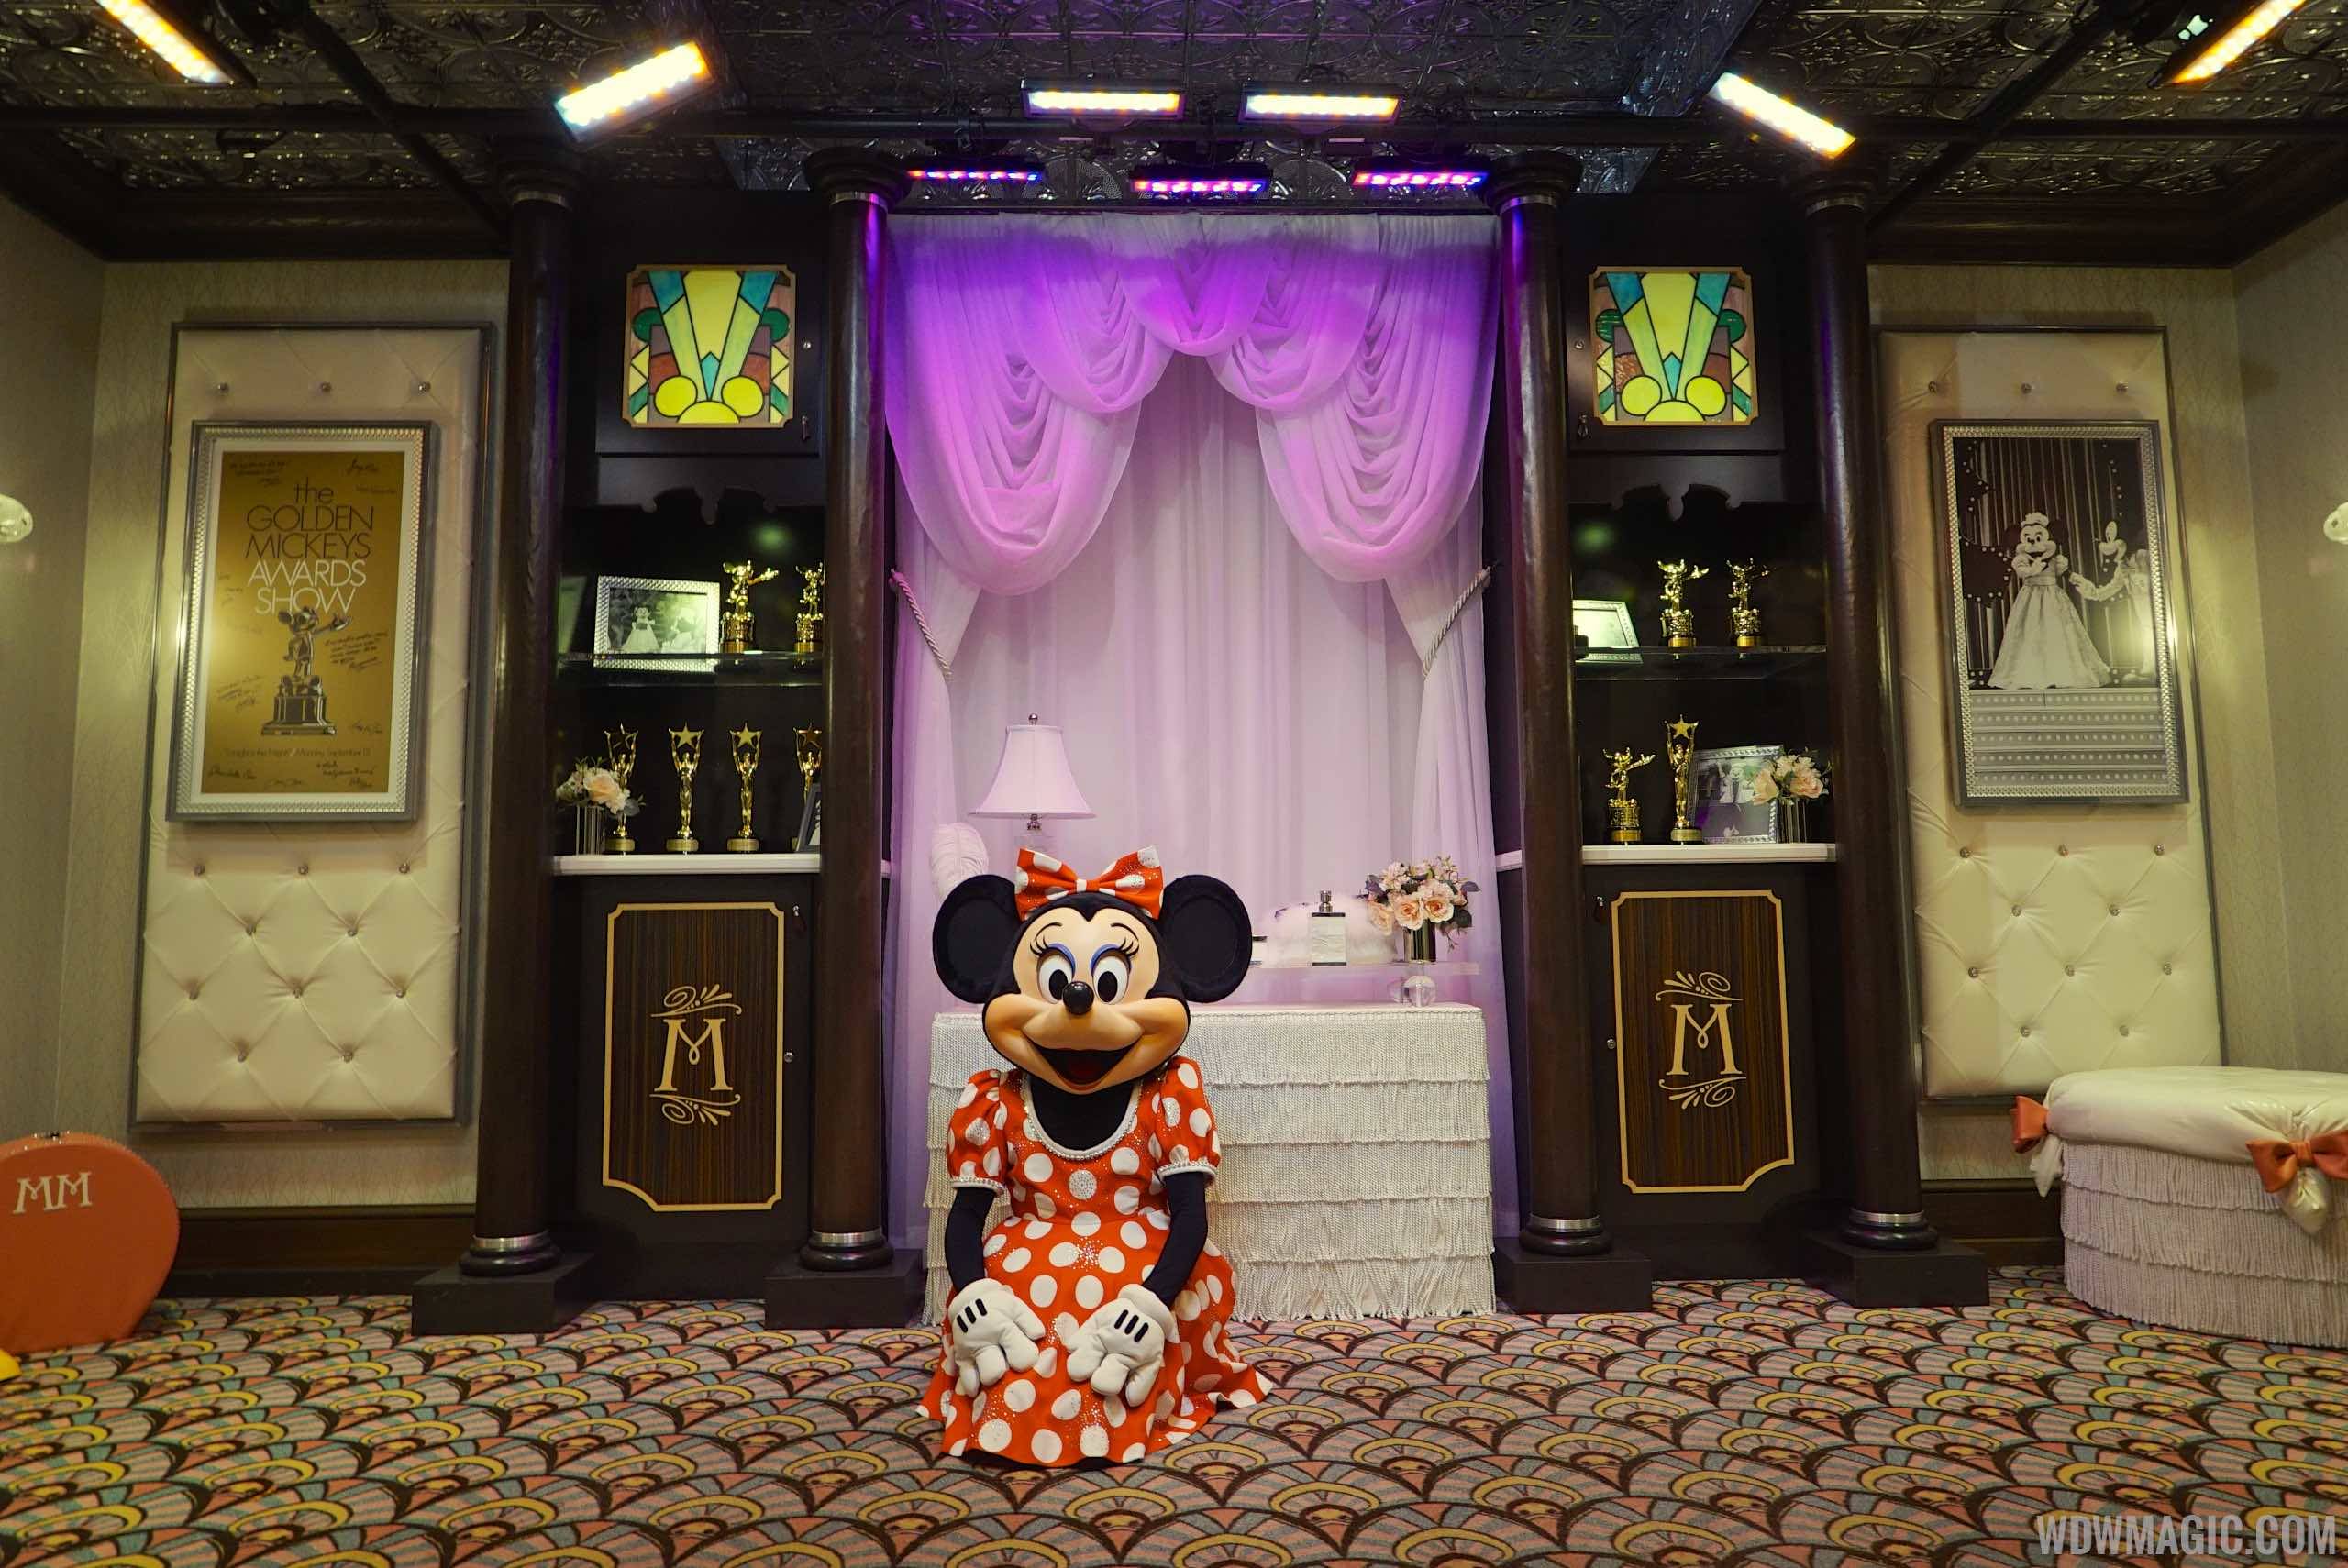 The Magic of Disney Animation - Minnie Mouse meet and greet